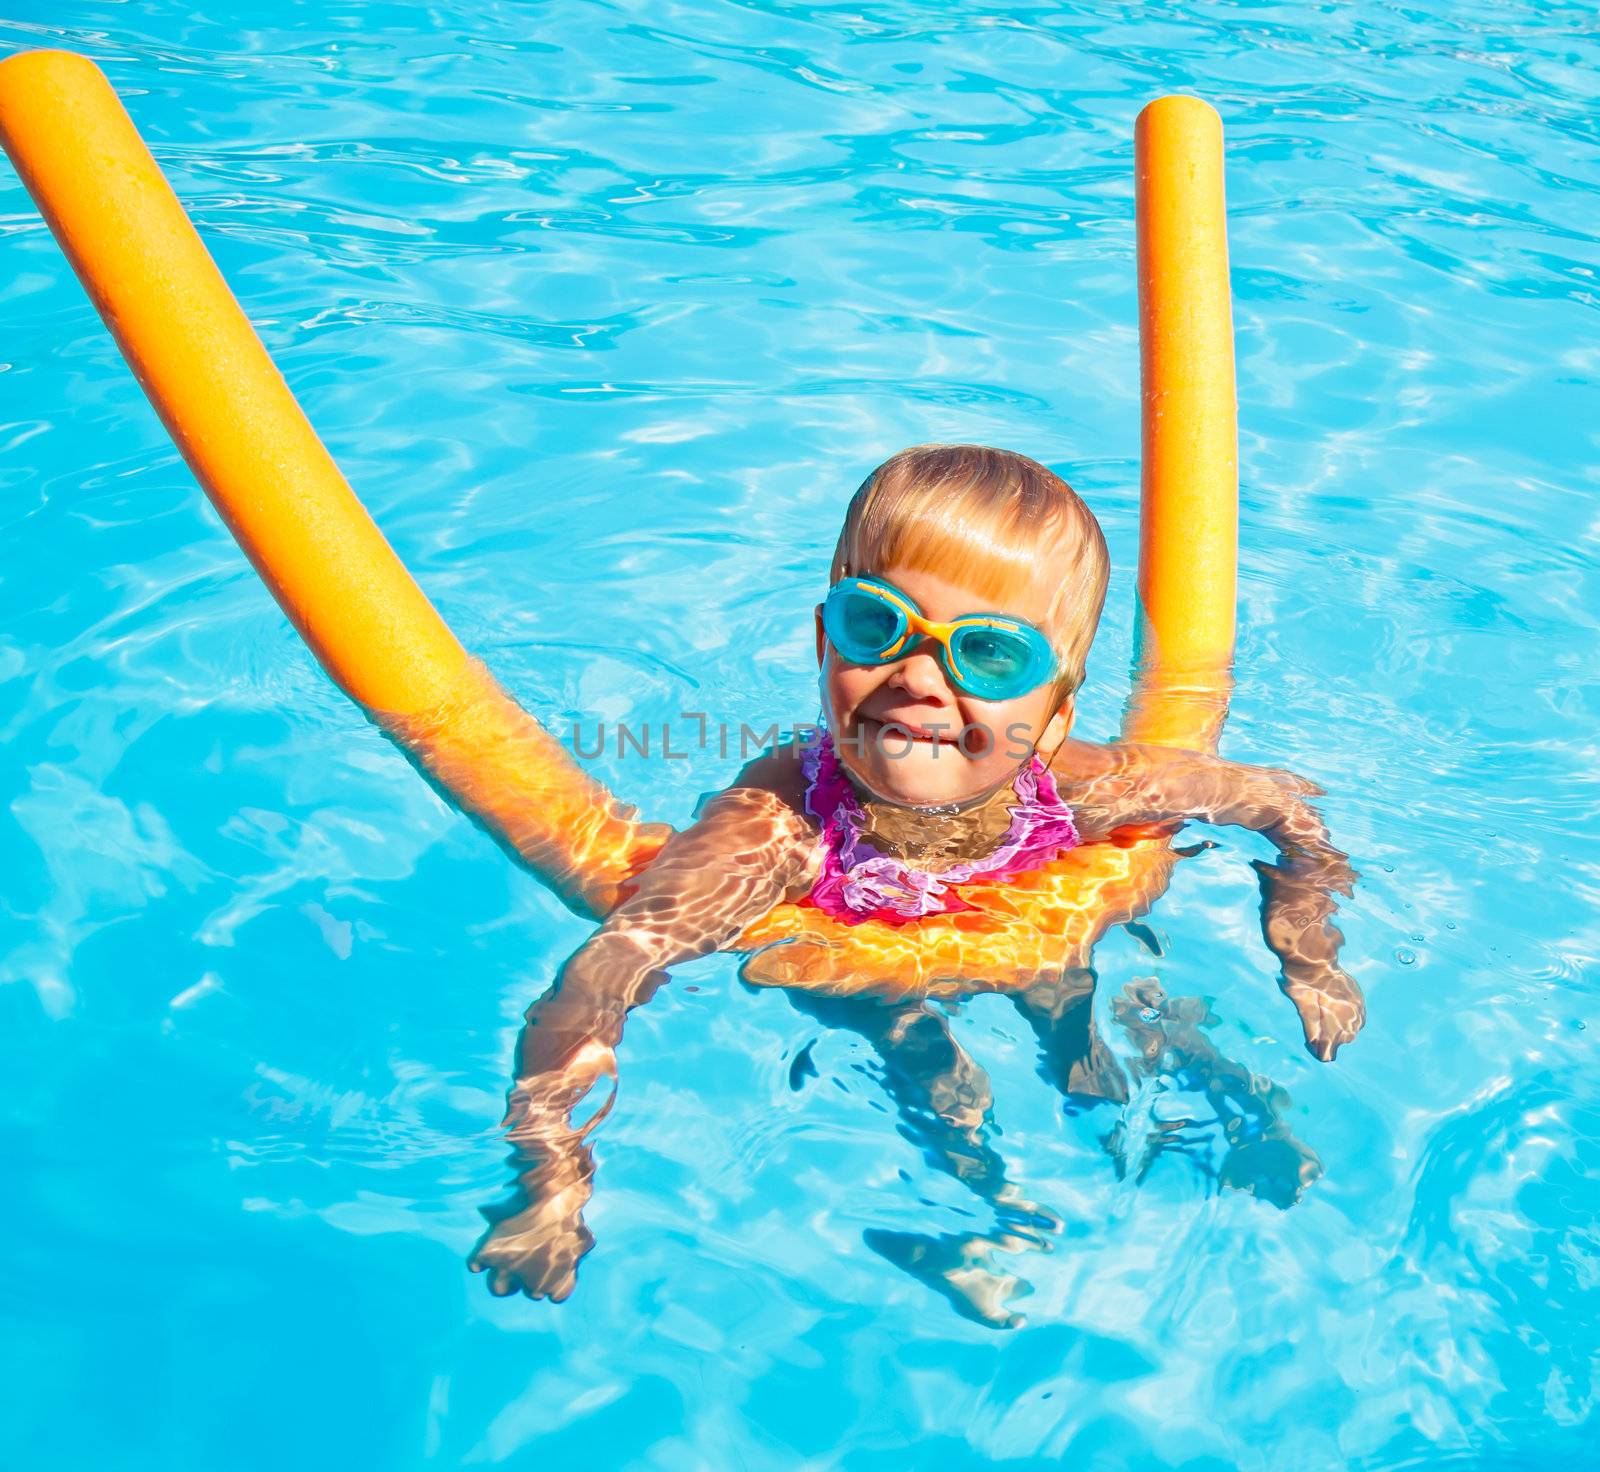 Little girl wearing swimming goggles in a hotel pool